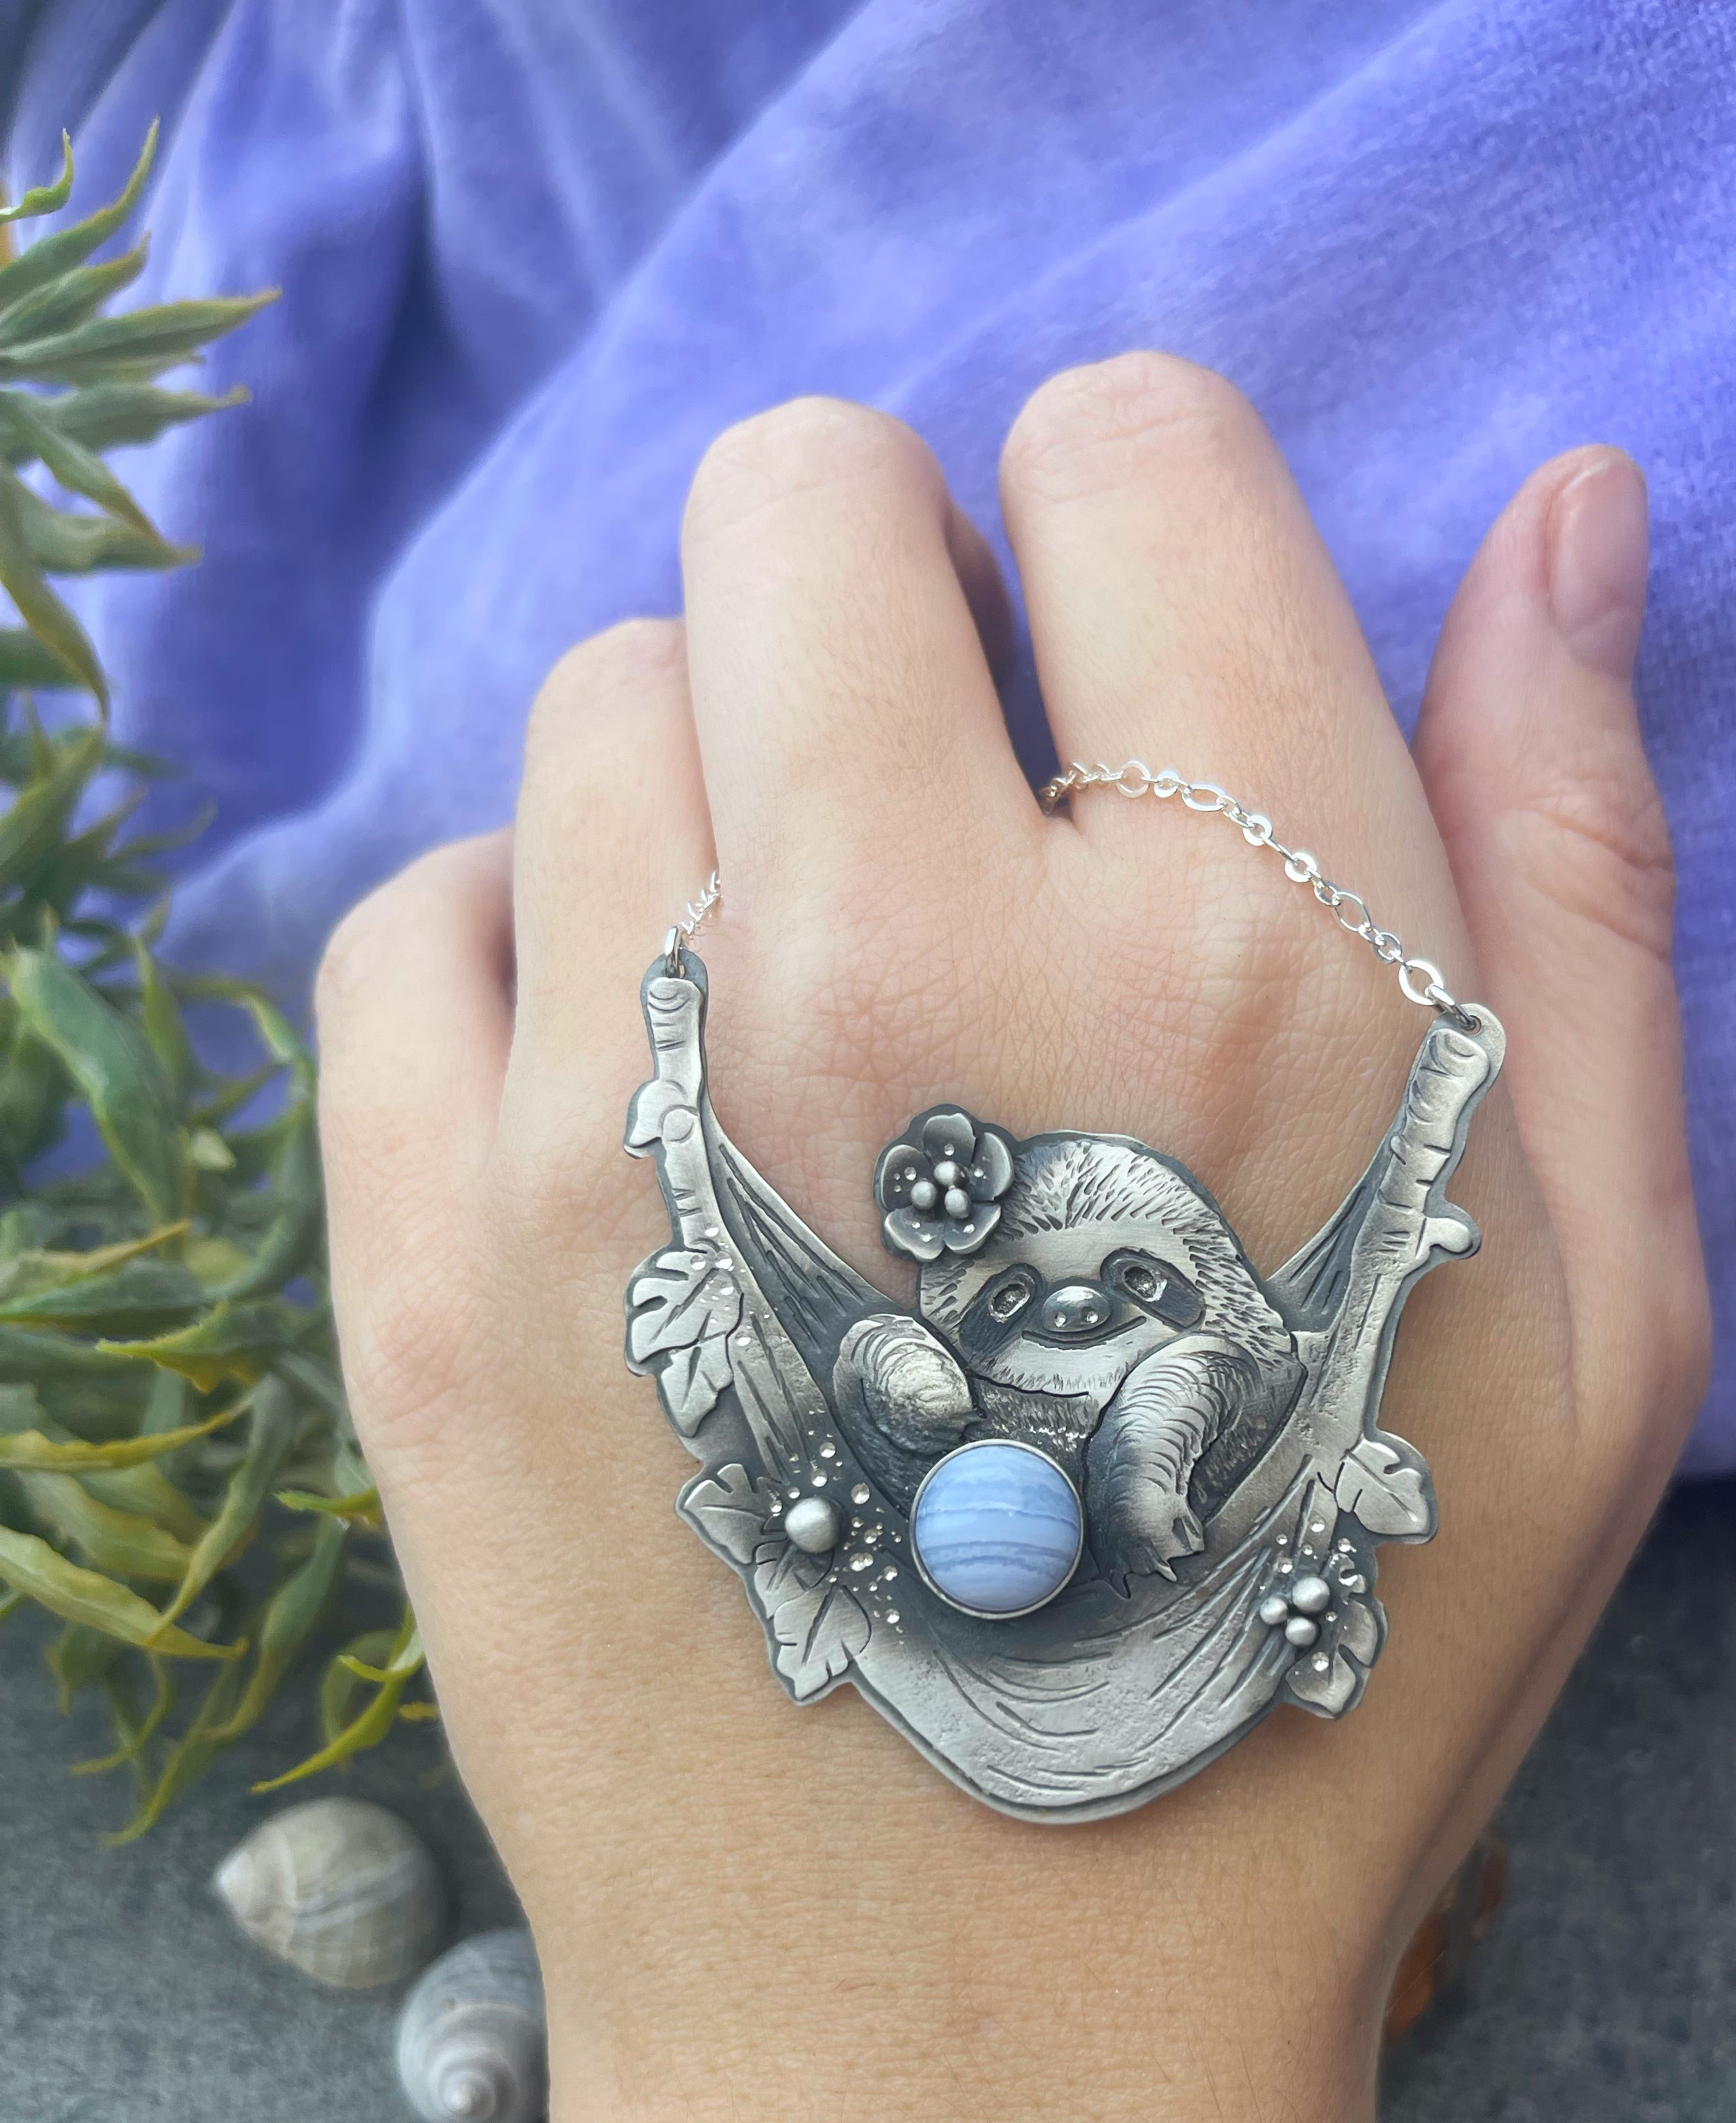 The Sloth Girl in a Hammock & Chalcedony